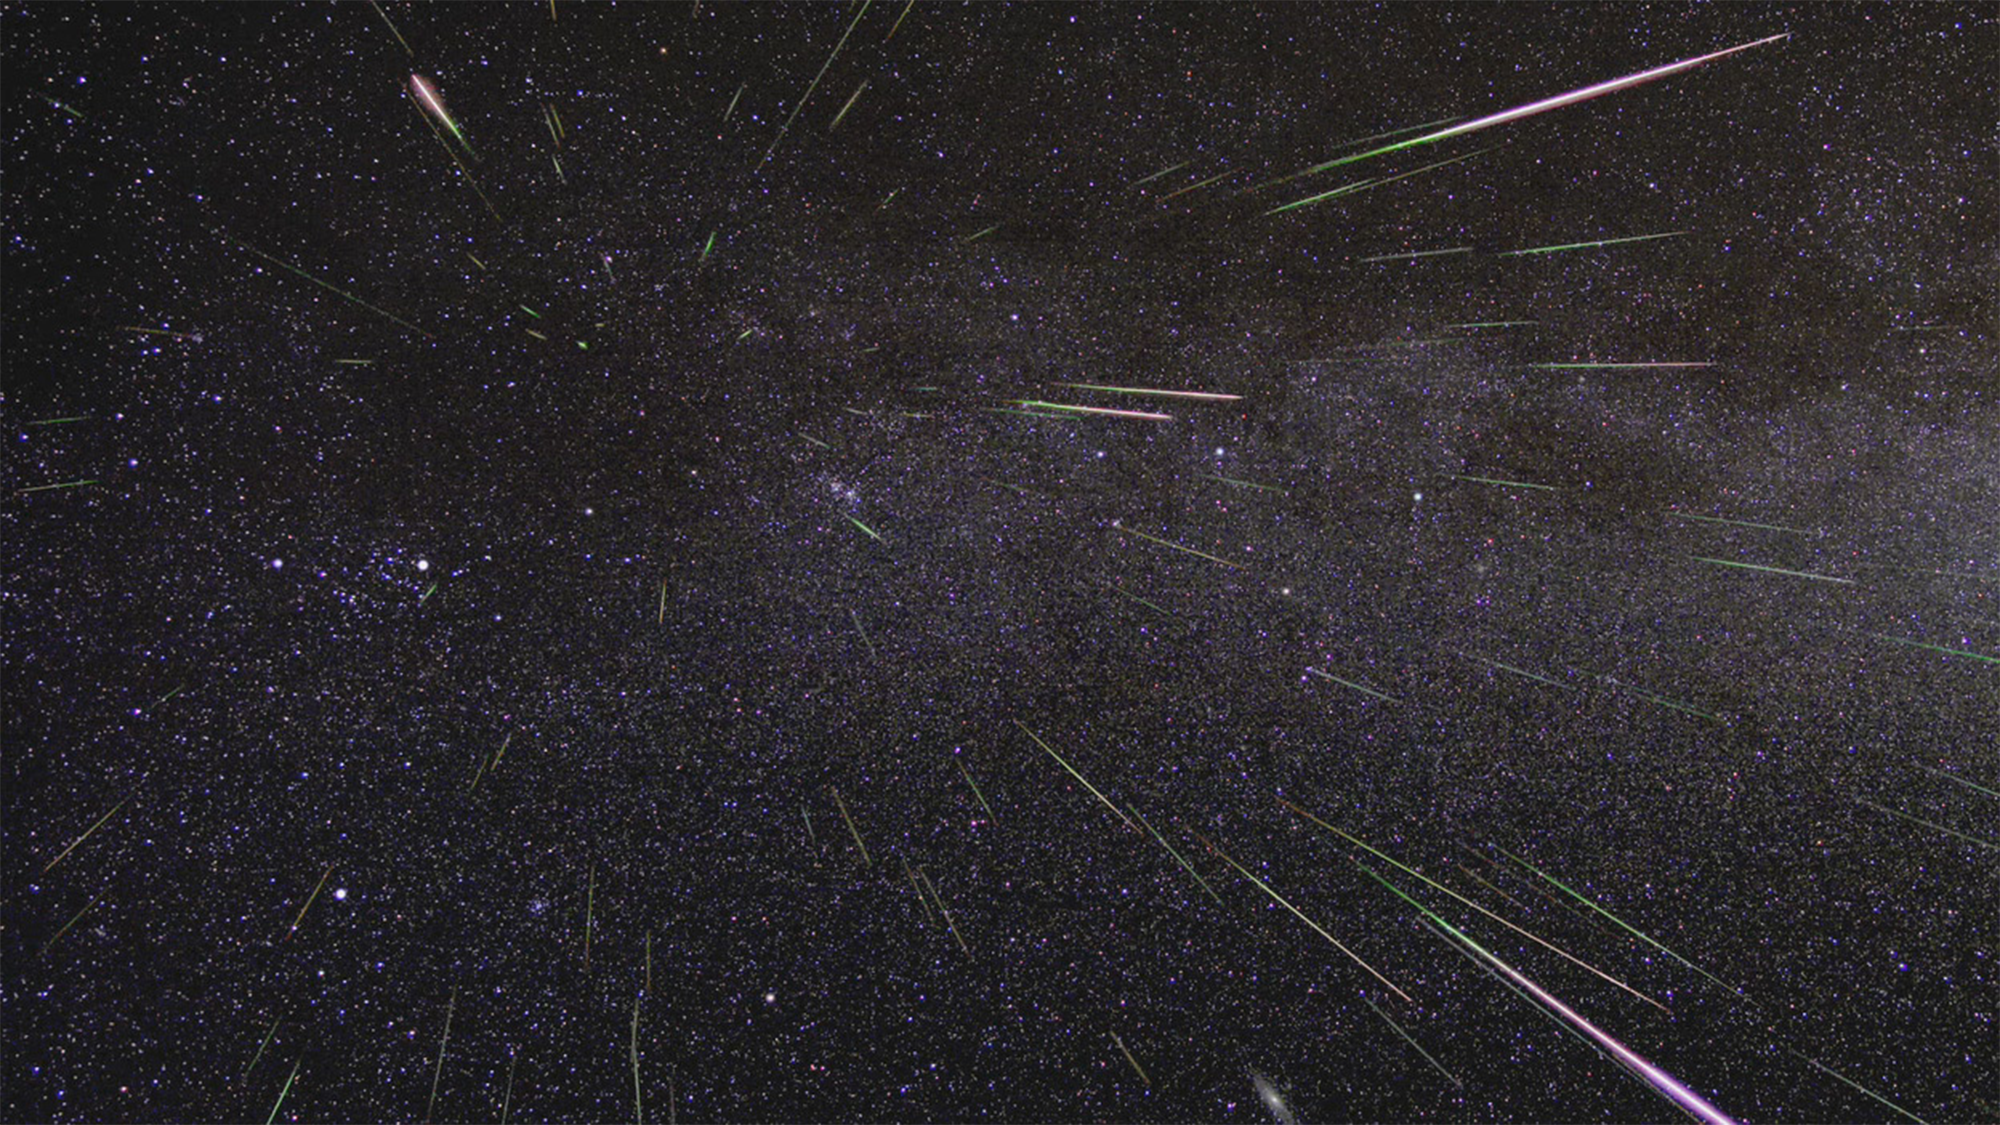 Two full moons, colorful meteors, and an asteroid will light up August’s sky